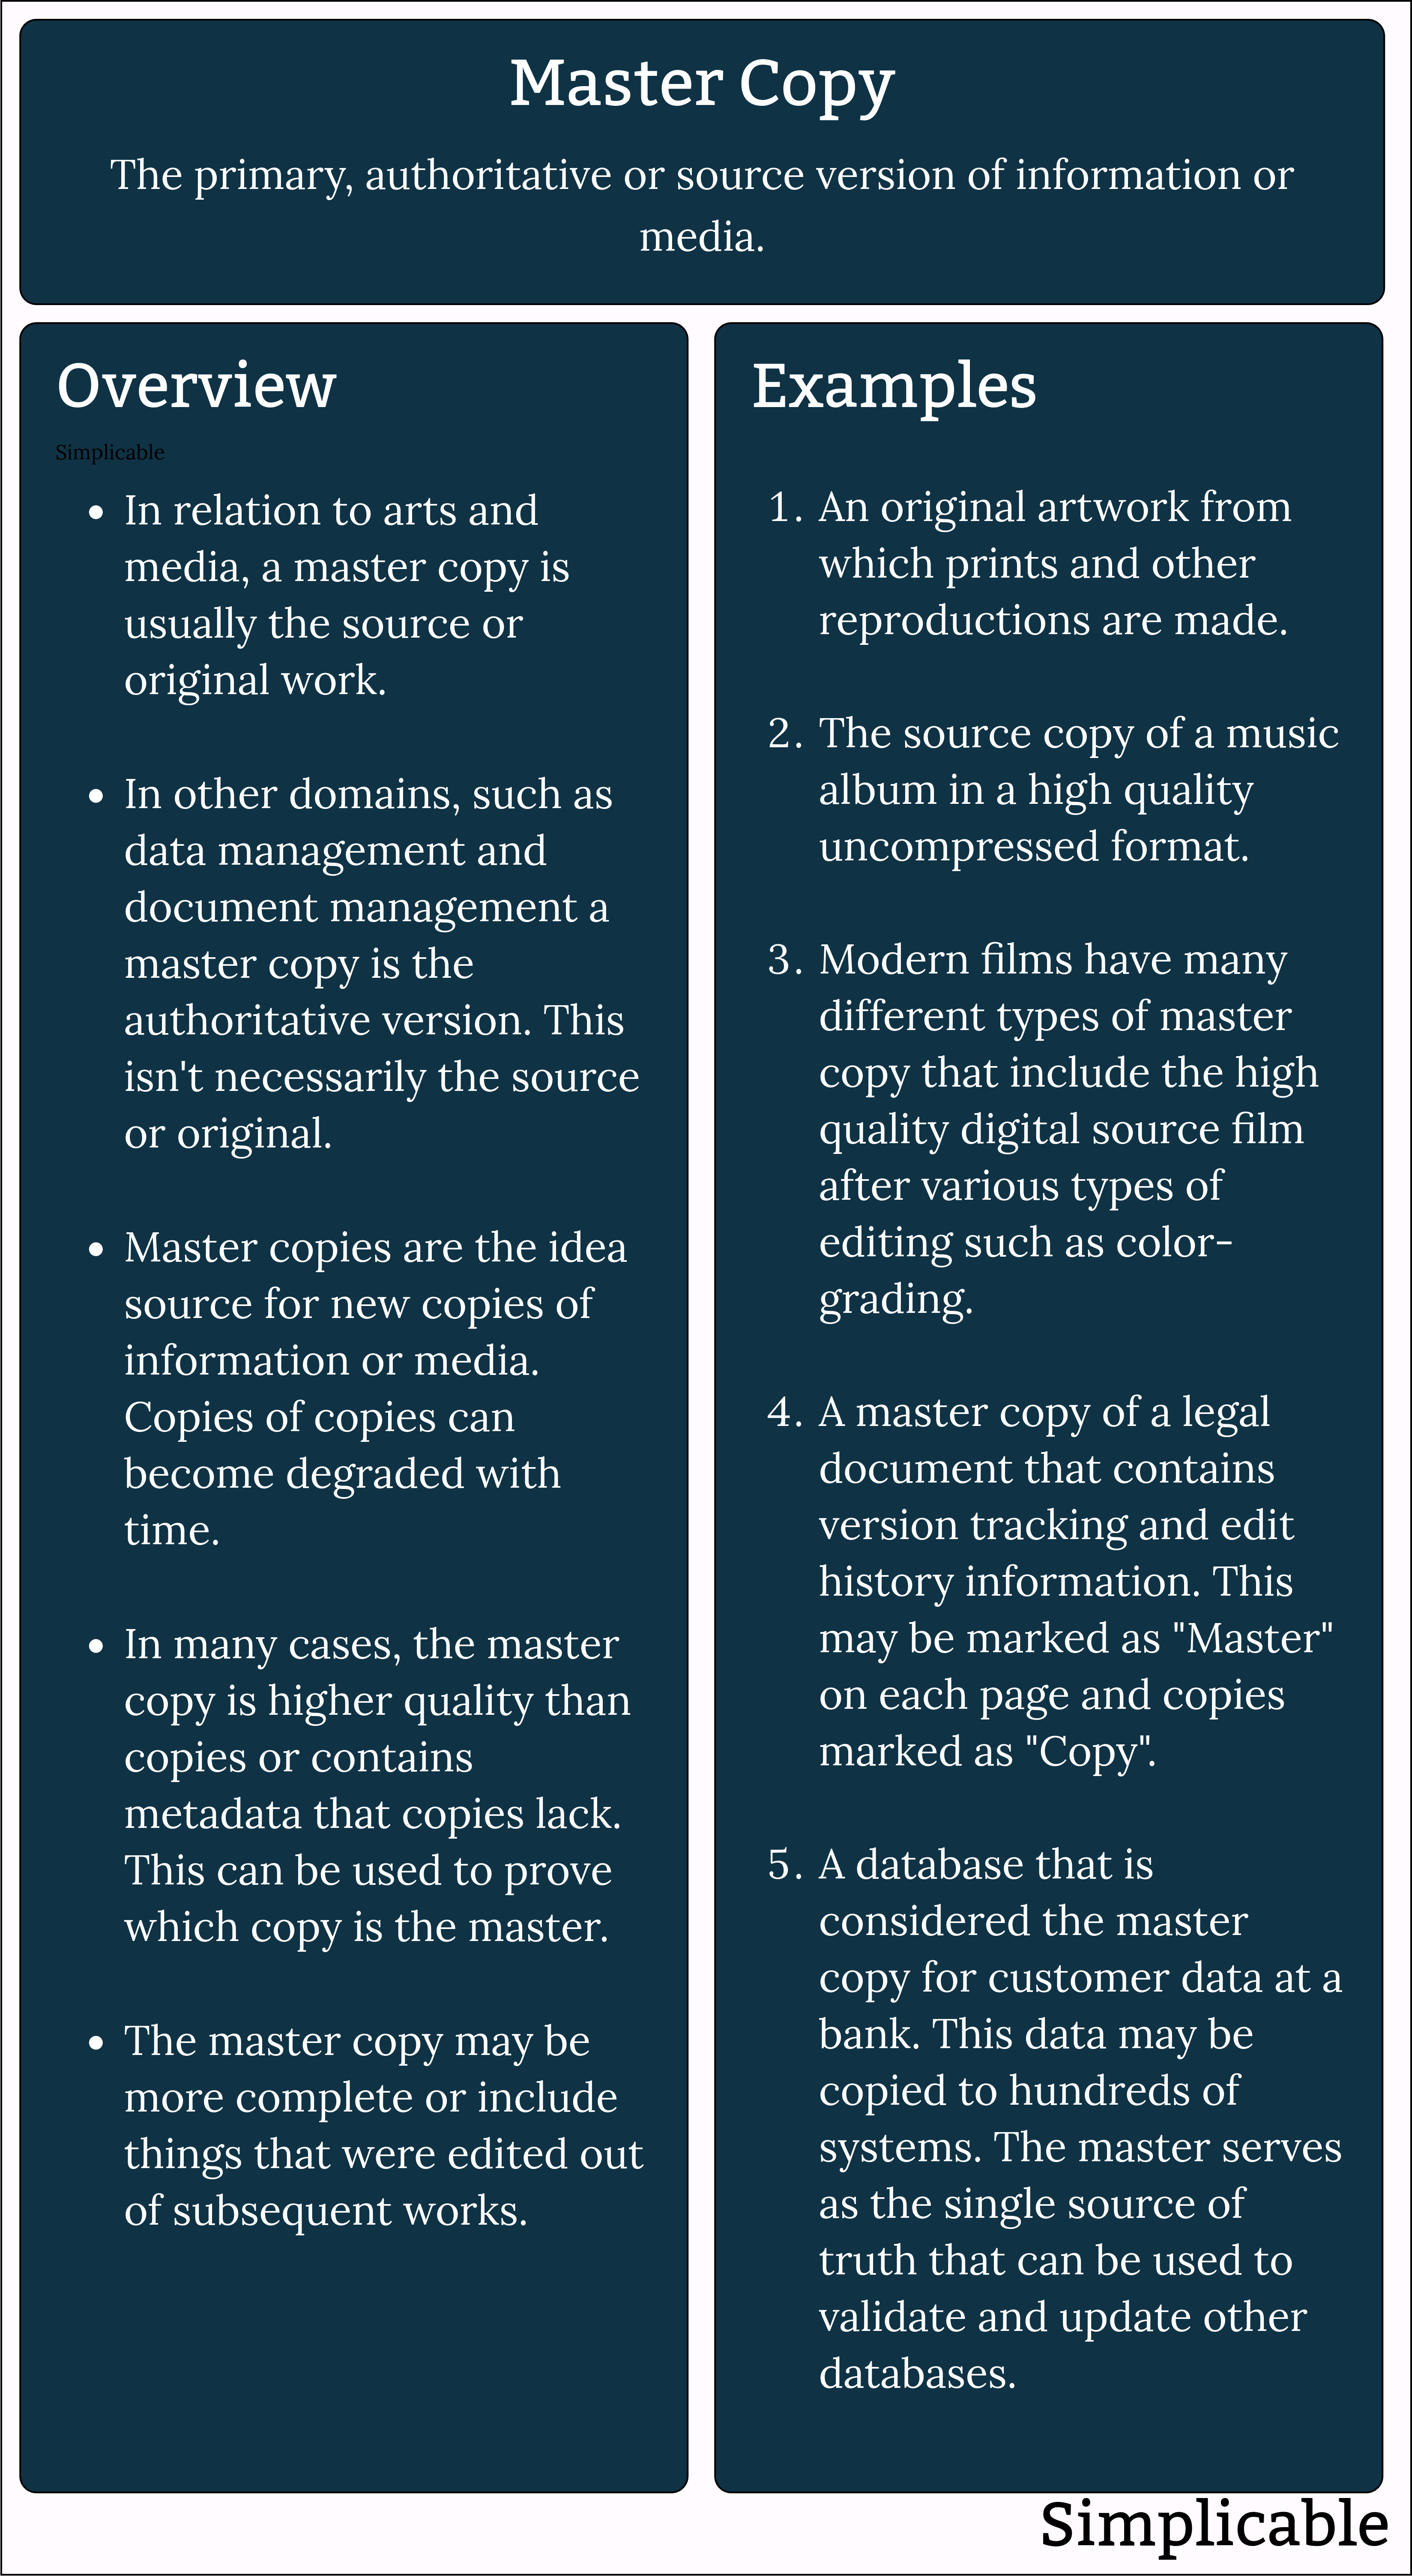 master copy overview and definition